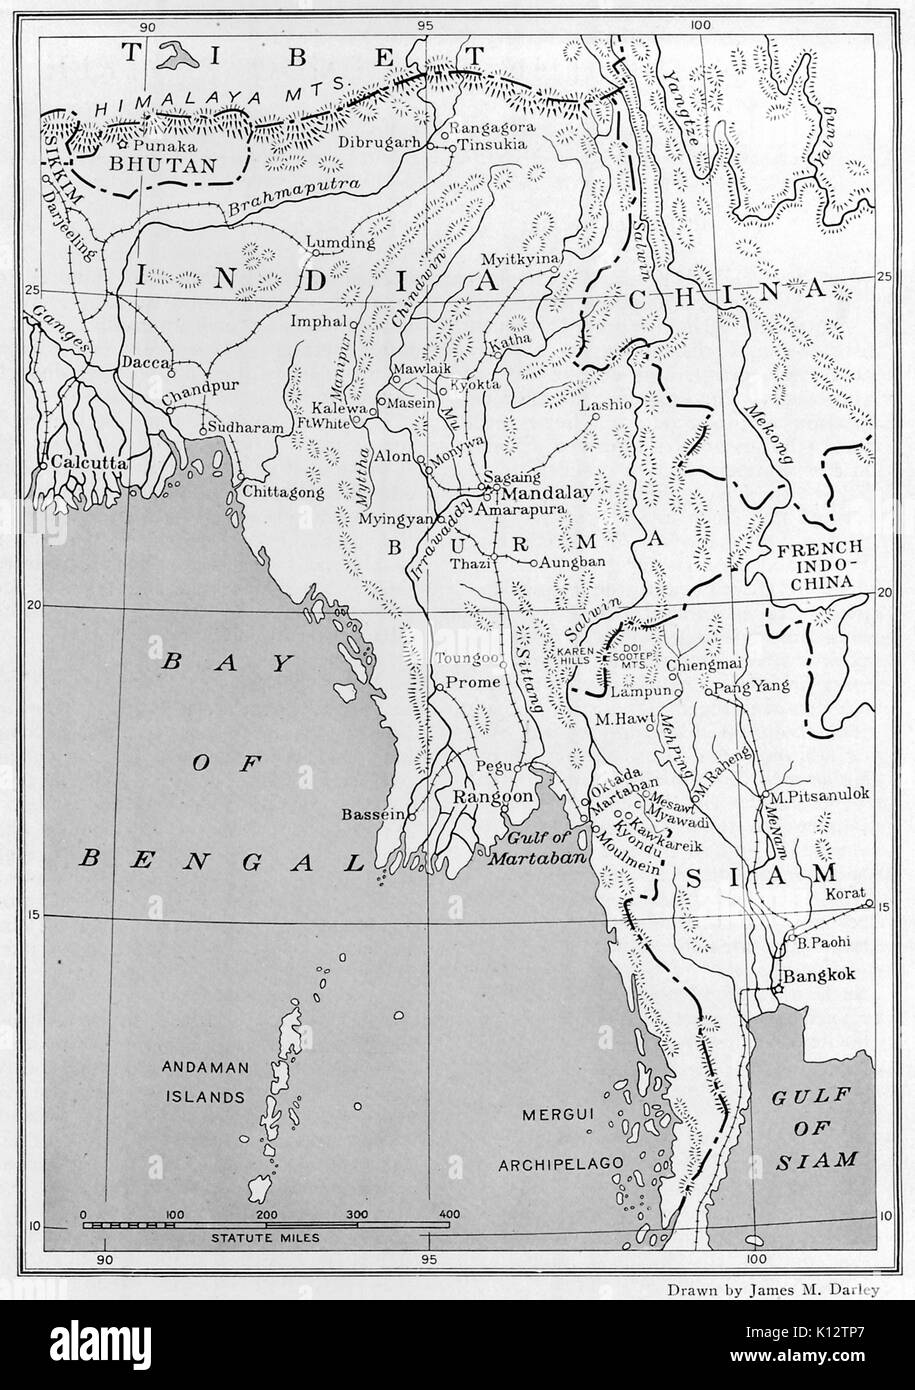 Map of Burma (now Myanmar), the Bay of Bengal, Siam (now Thailand), India, China, Tibet, and other areas of Southeast Asia, China, 1922. Stock Photo